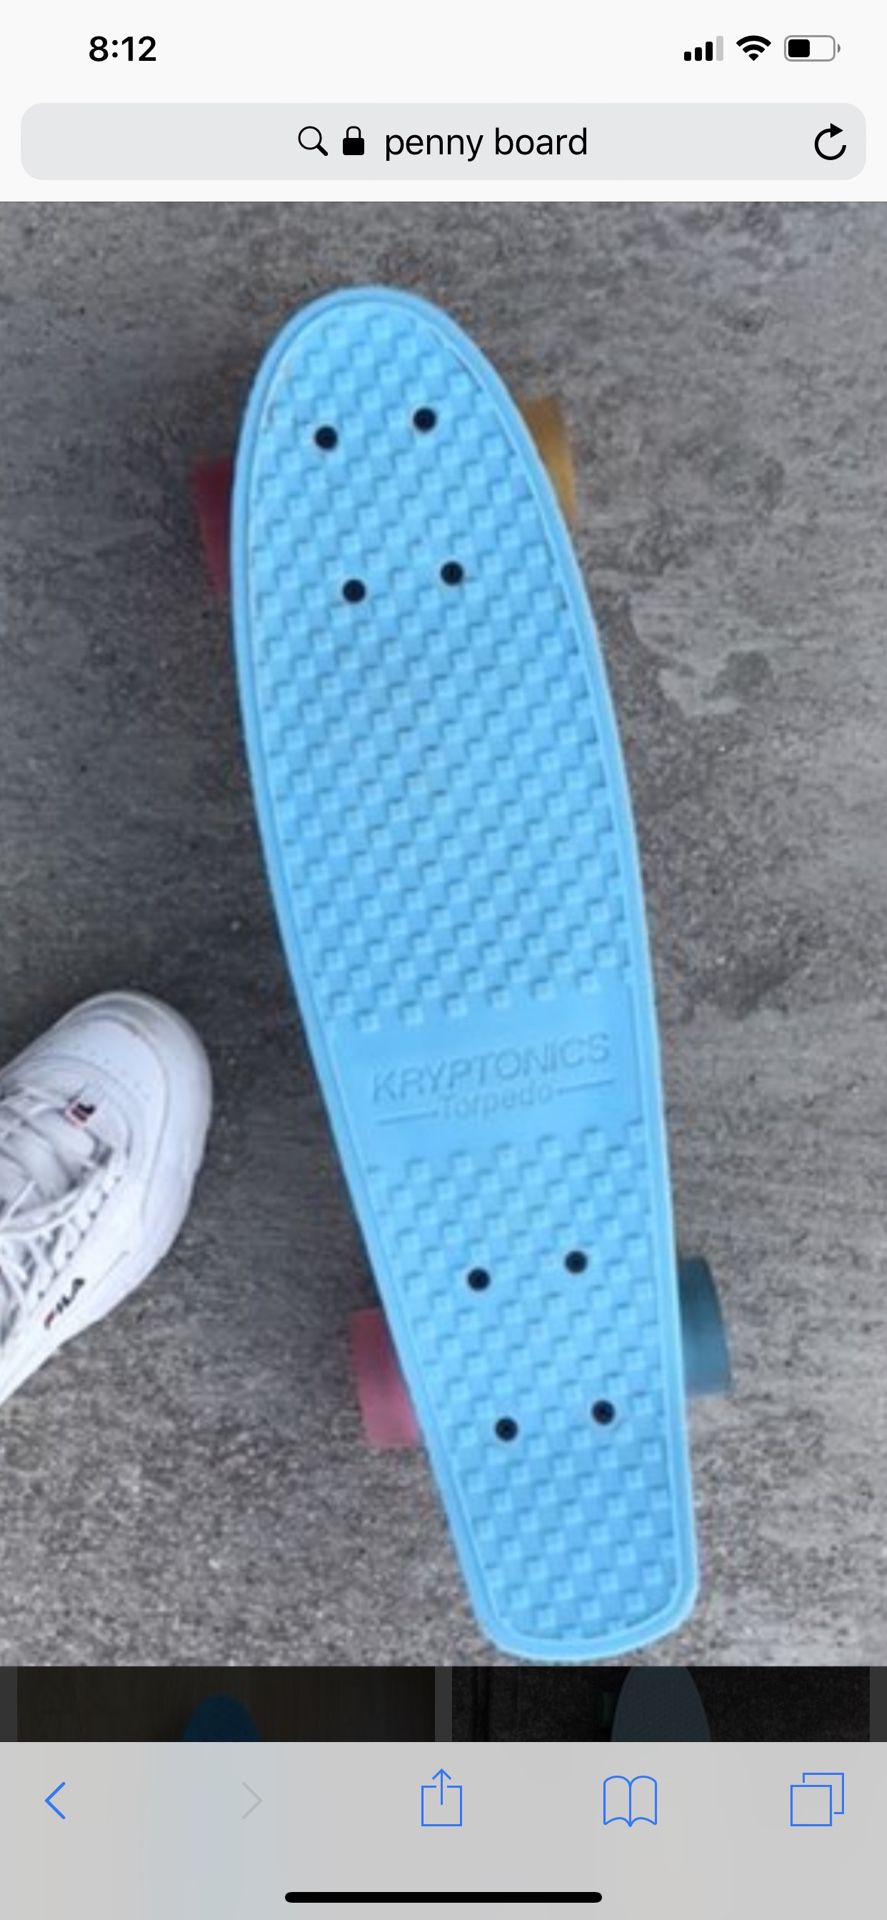 Looking for a penny board